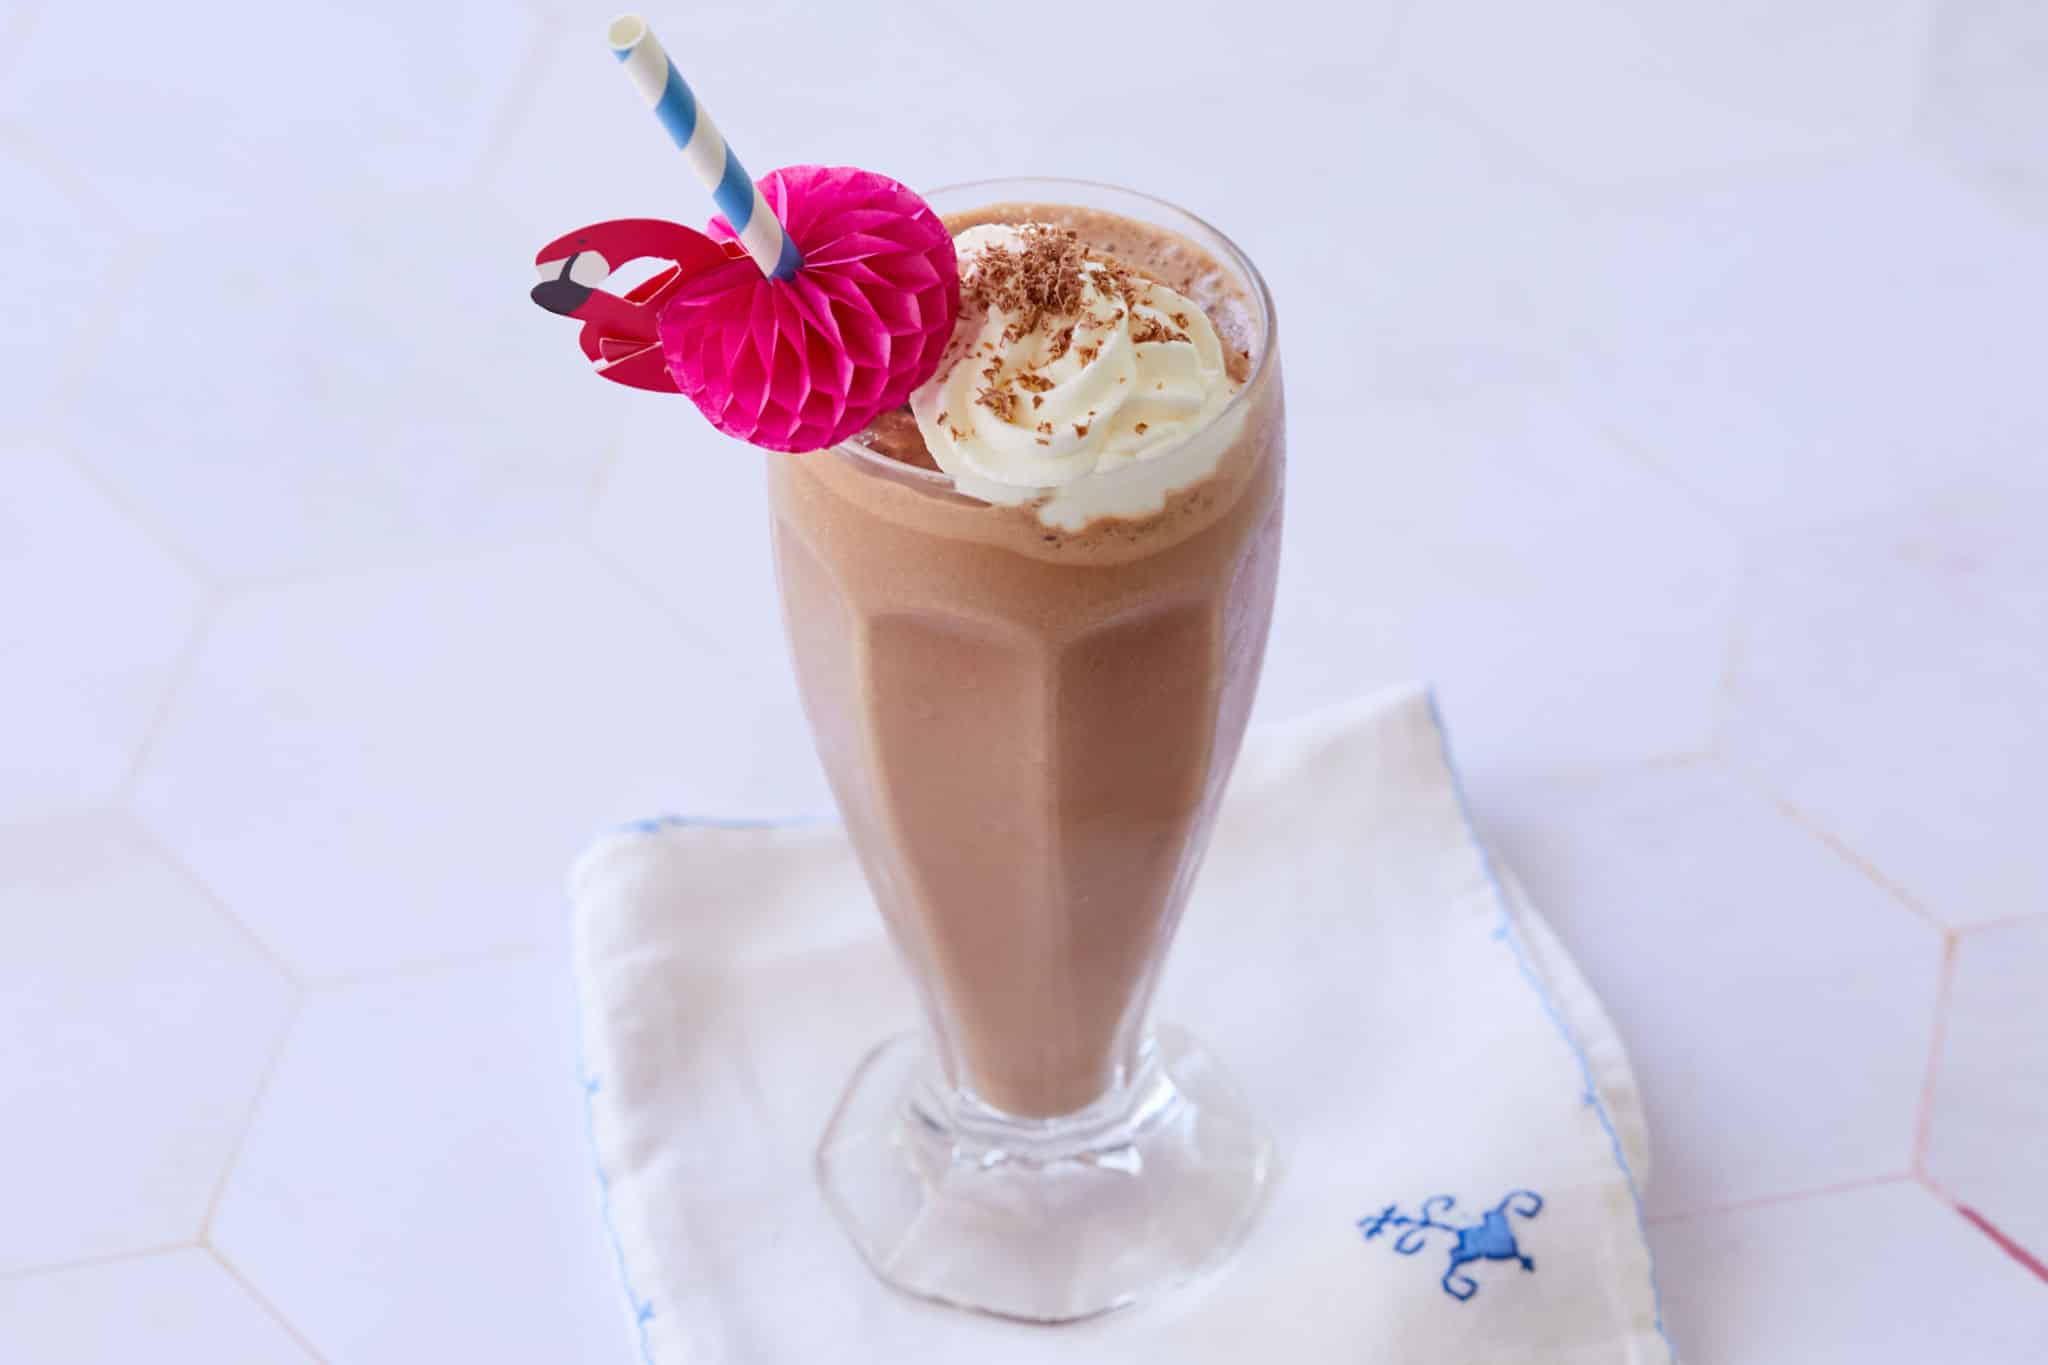 An old-fashioned chocolate malt milkshake, served in a soda fountain inspired glass, with whipped cream.